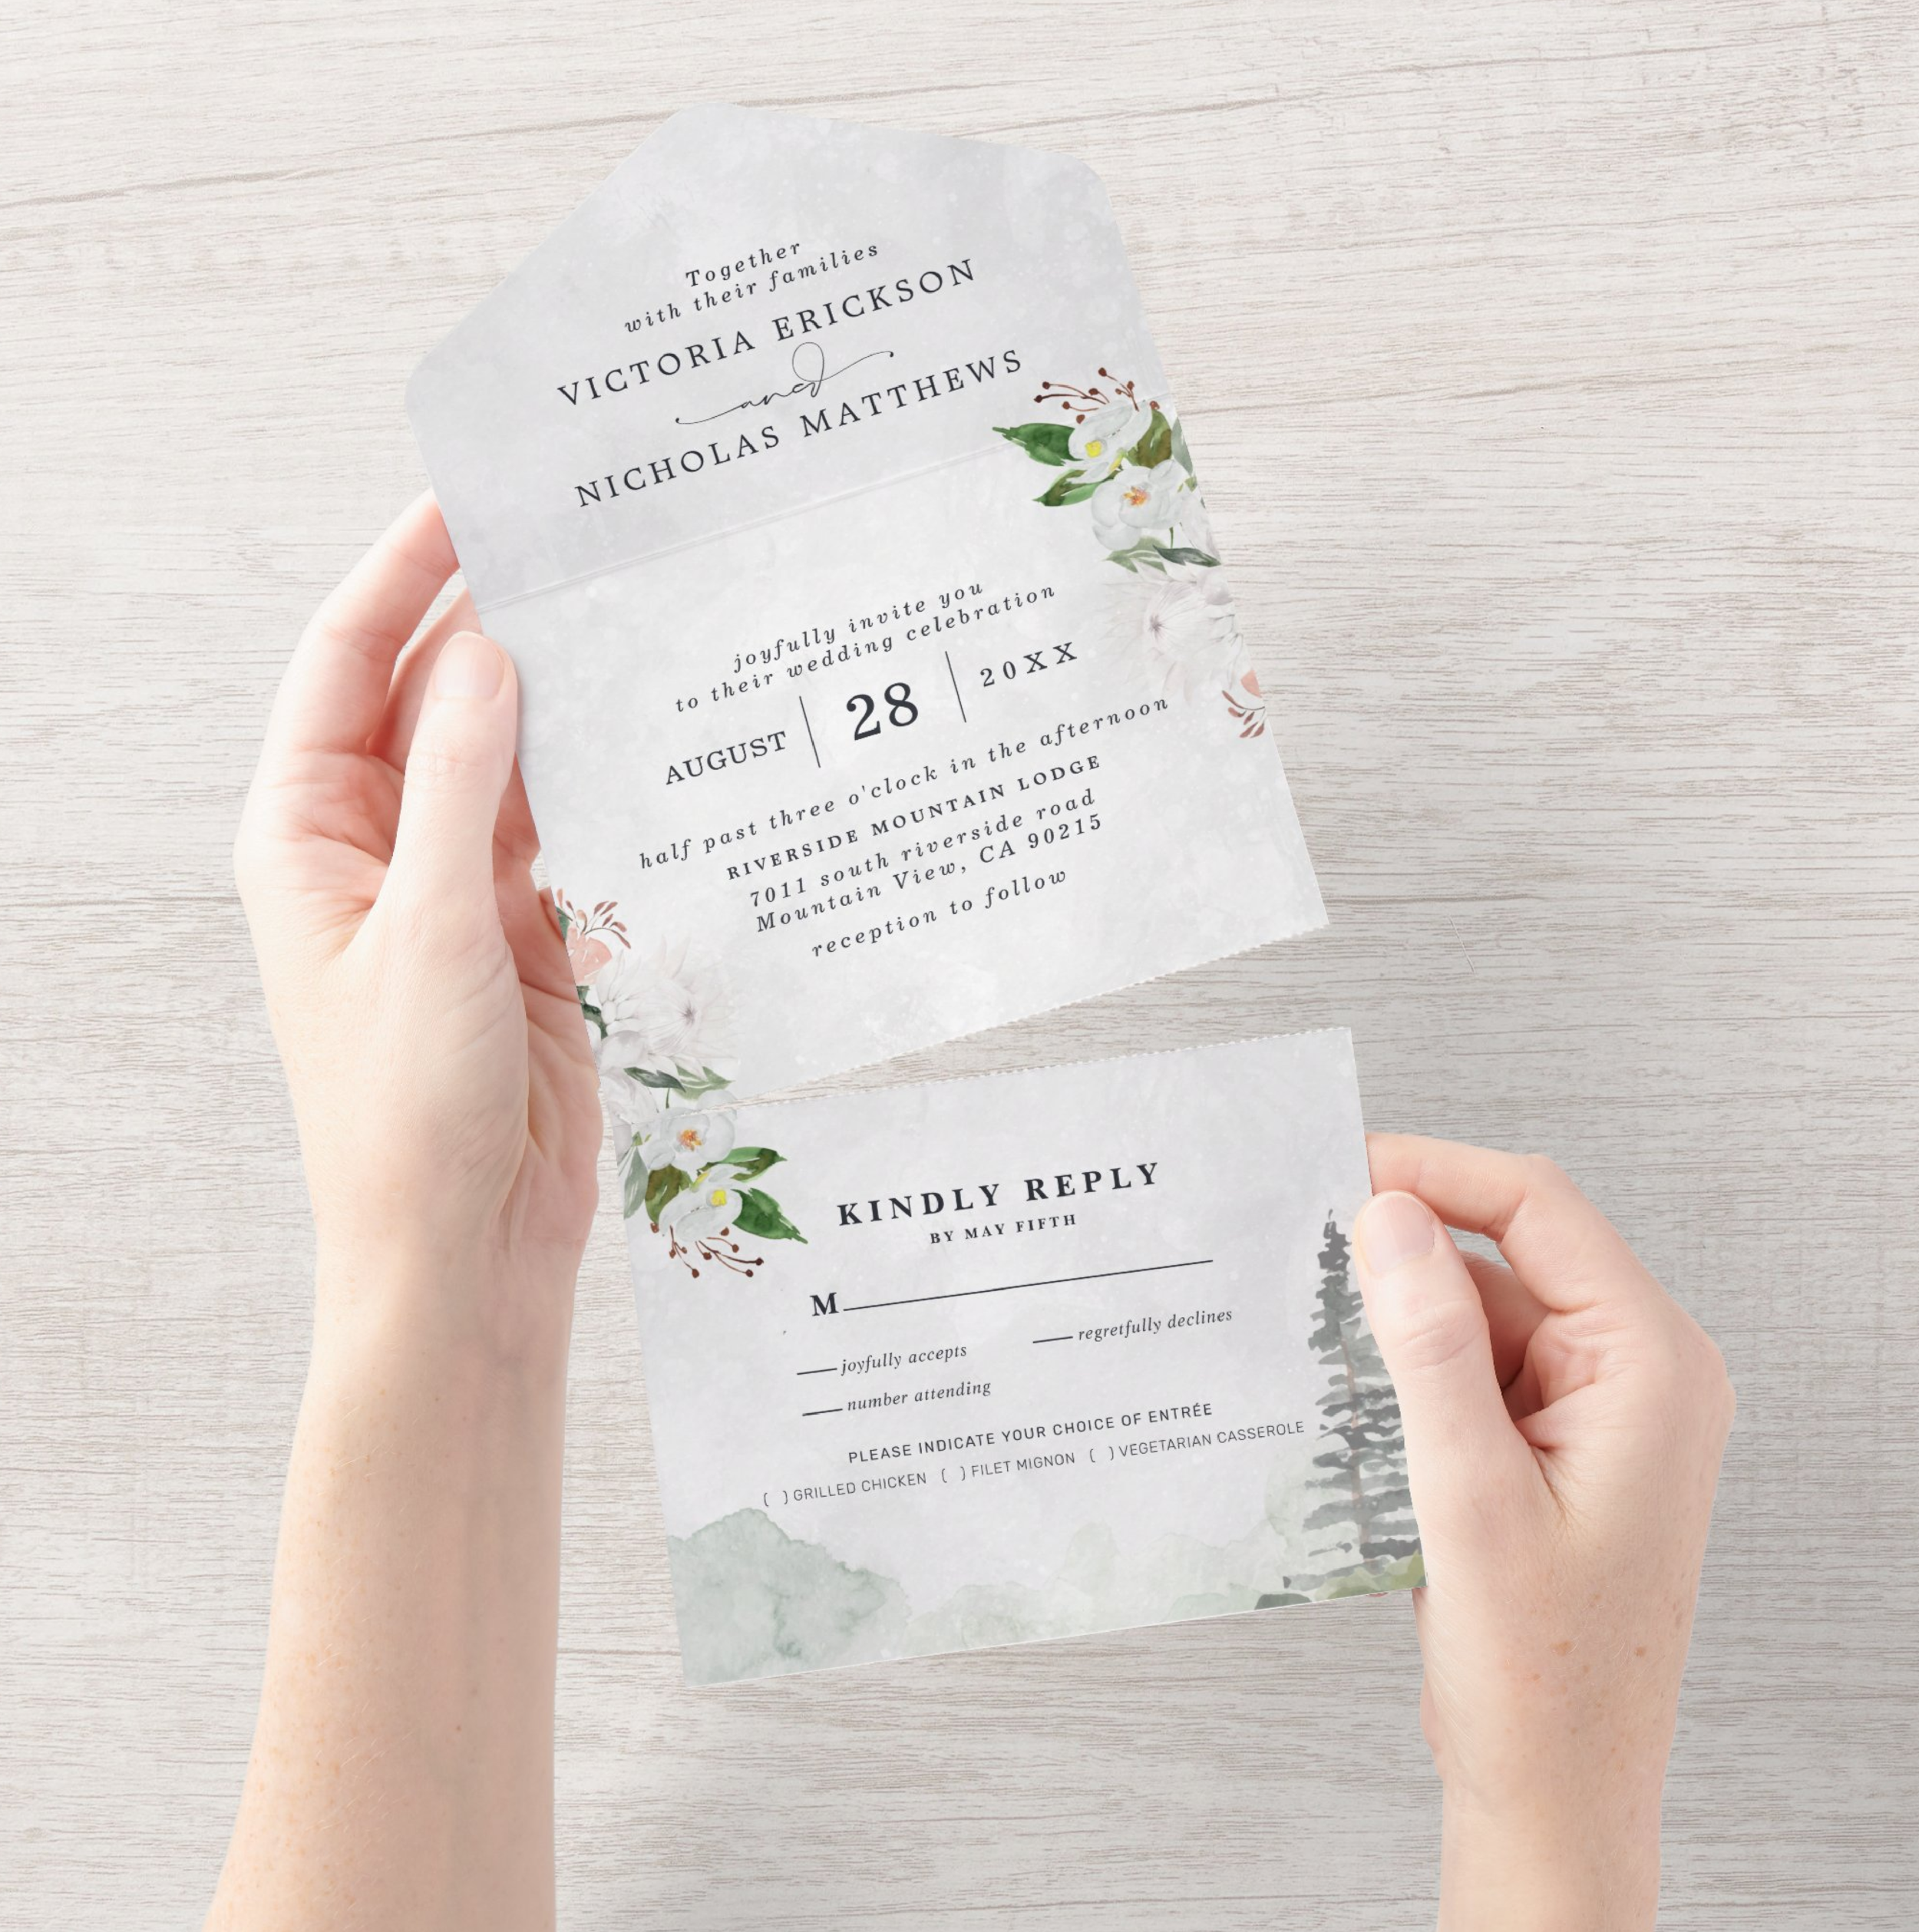 rustic_mountain_wedding_all_in_one_wedding_invite-rb4f89177379641d1b424883f05c9d84b_uu9ct_1024.png